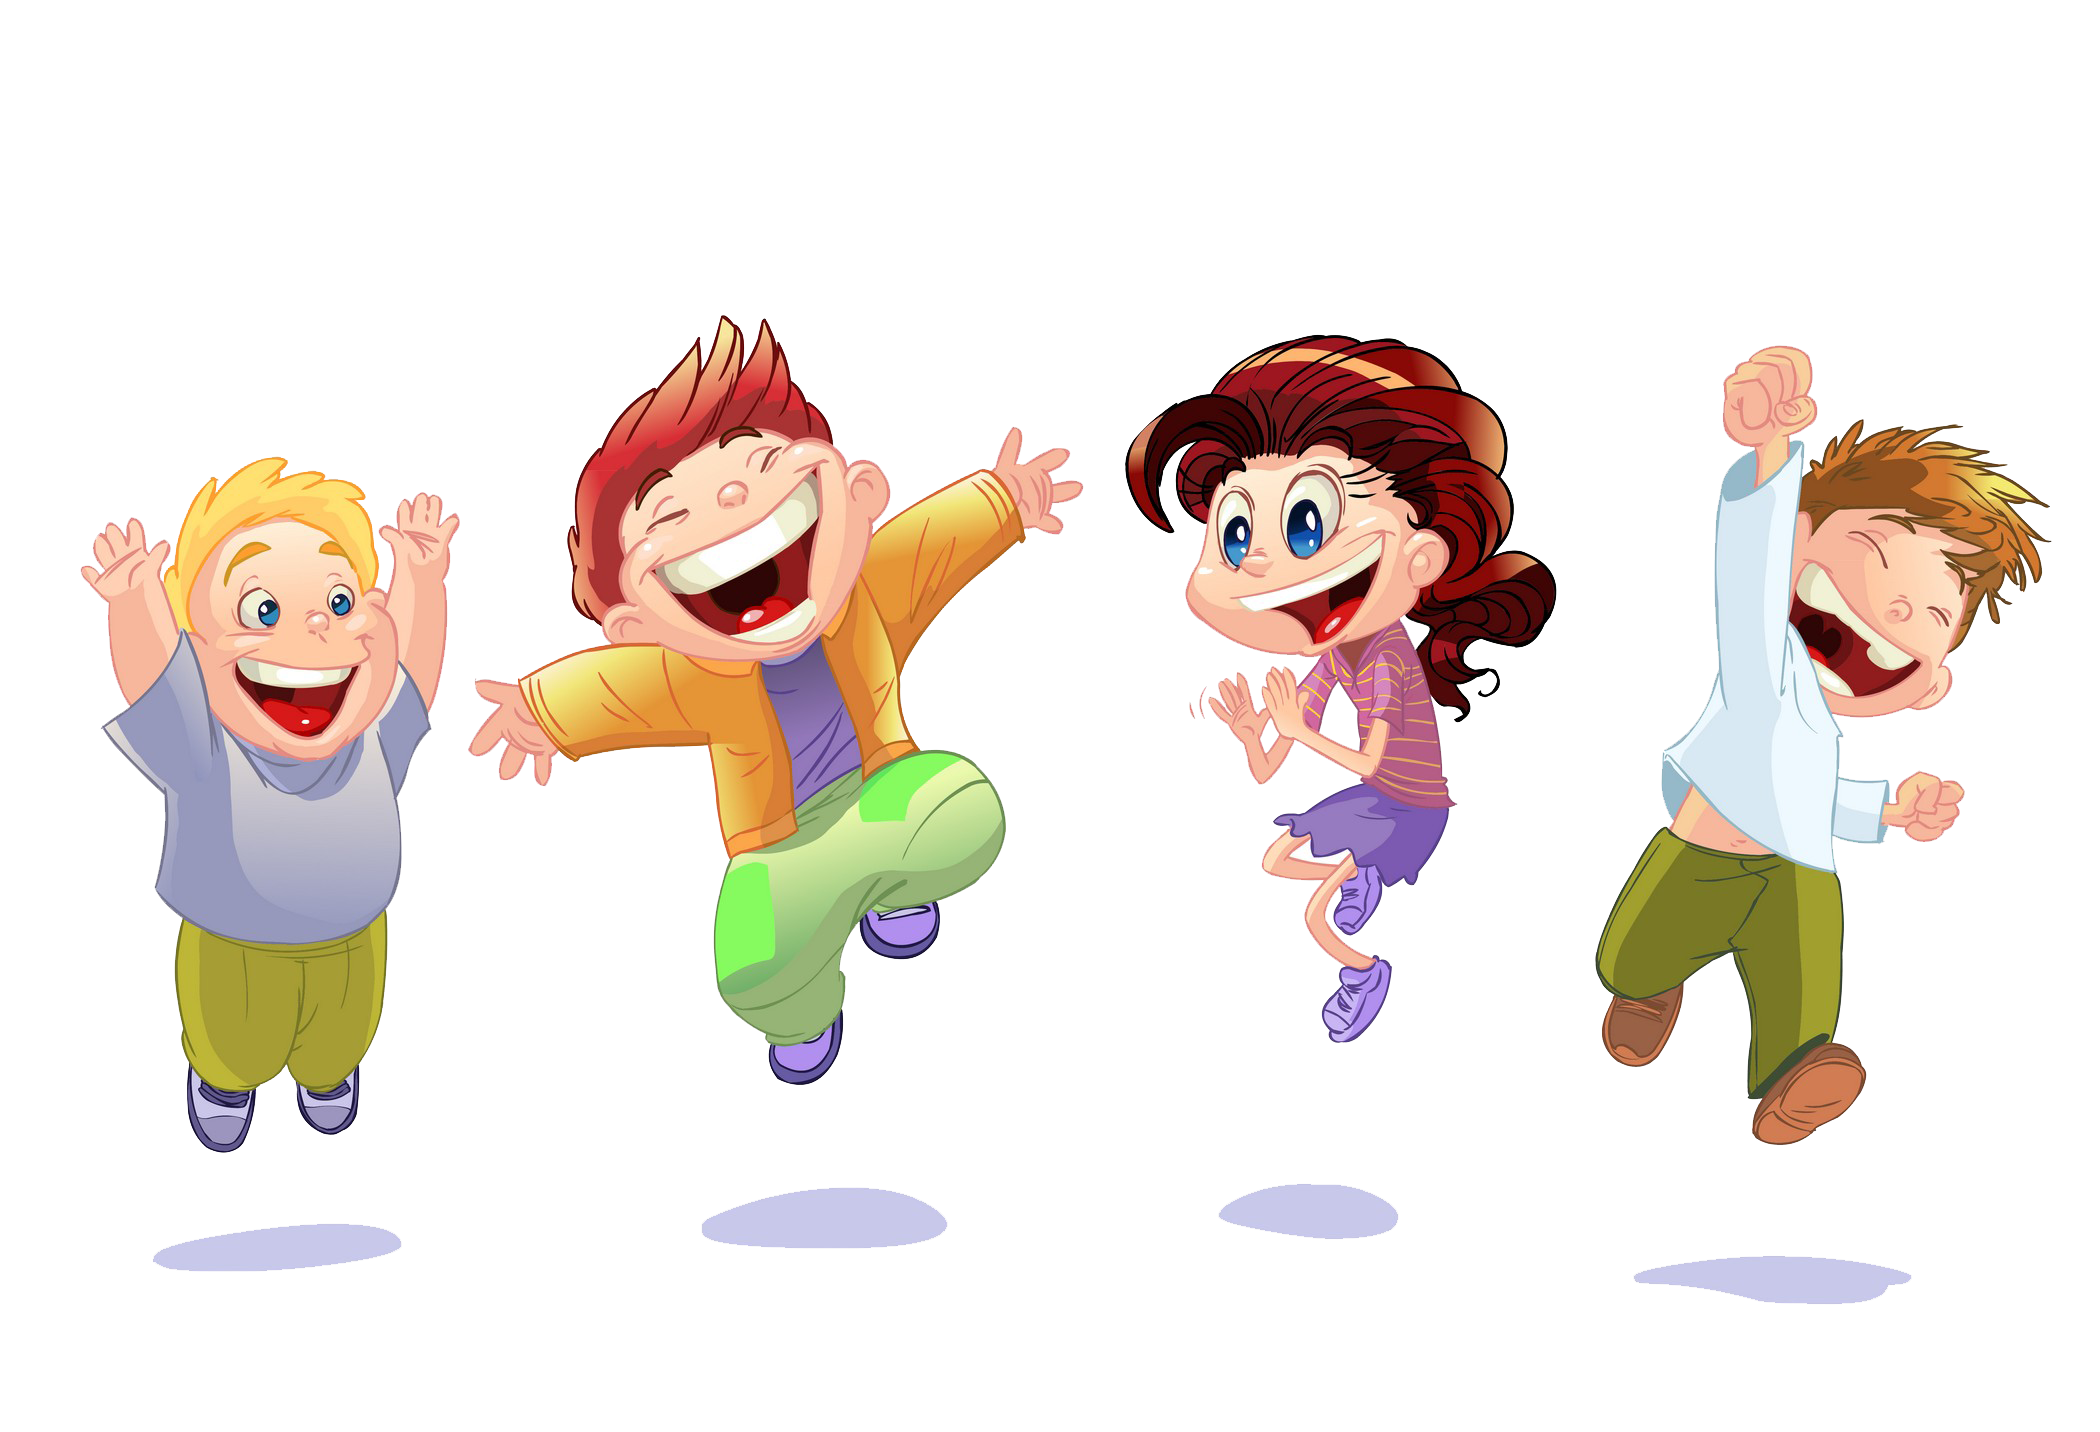 Cartoon People PNG Images Transparent Background | PNG Play